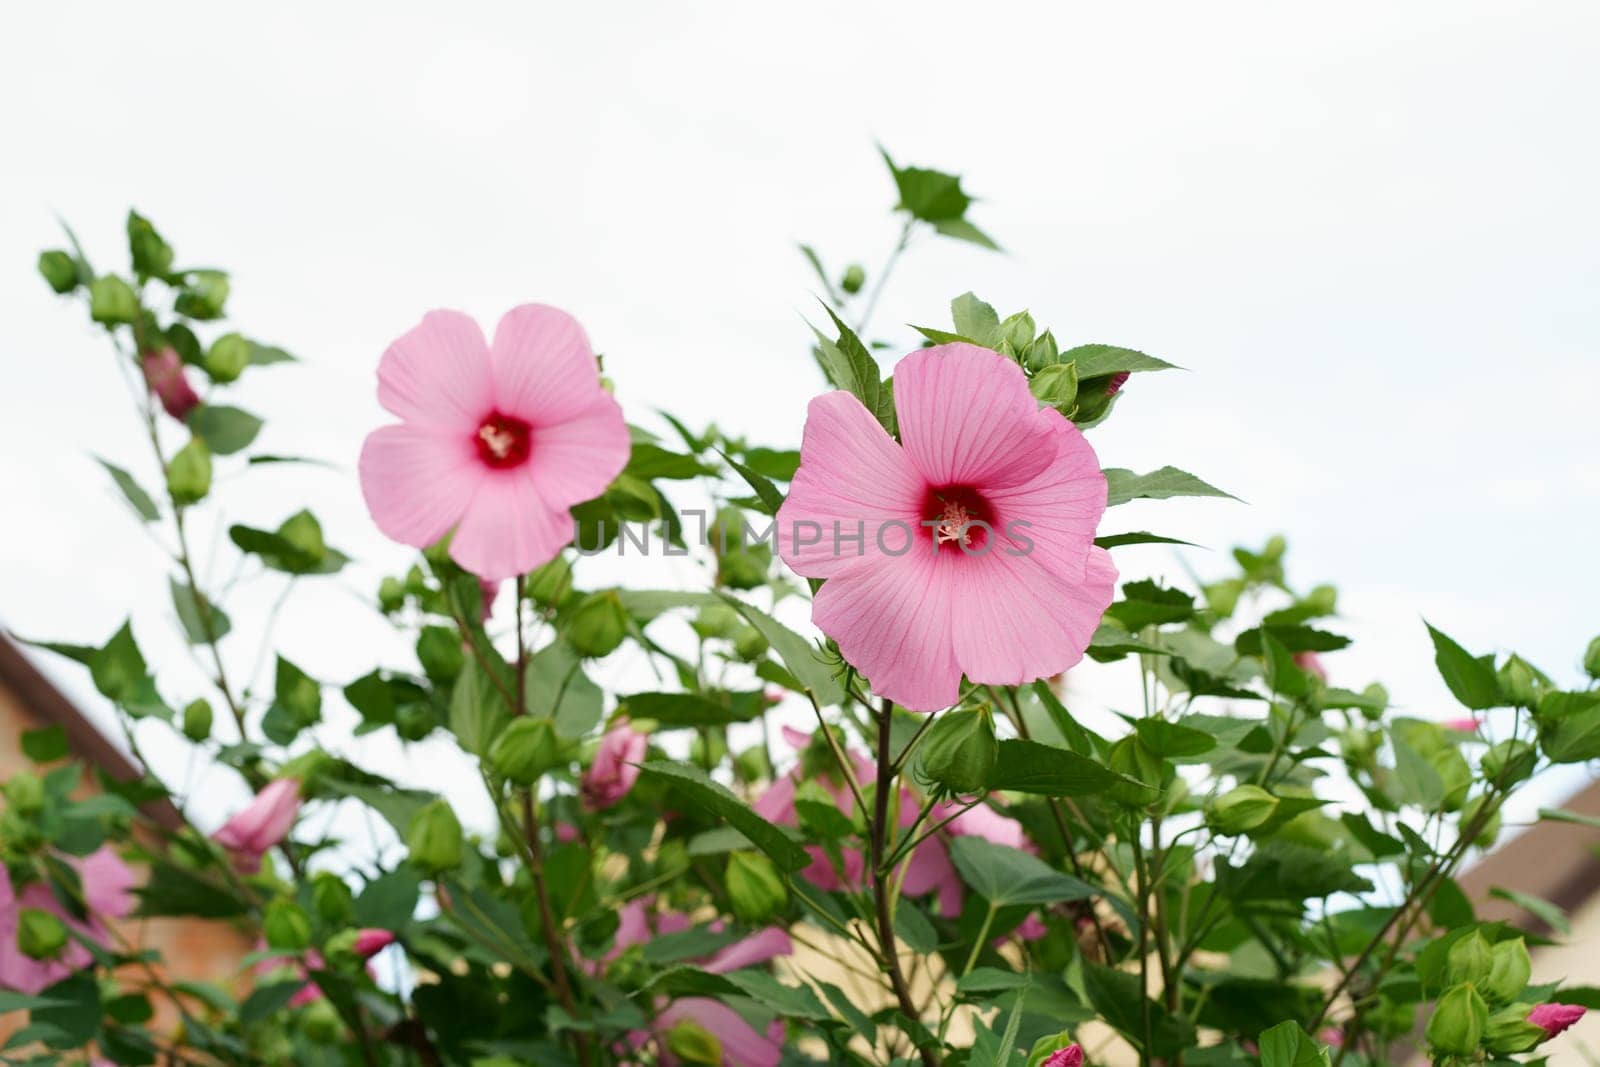 A large purple hibiscus flower on a floral background hibiscus moscheutos . Rose Mallow